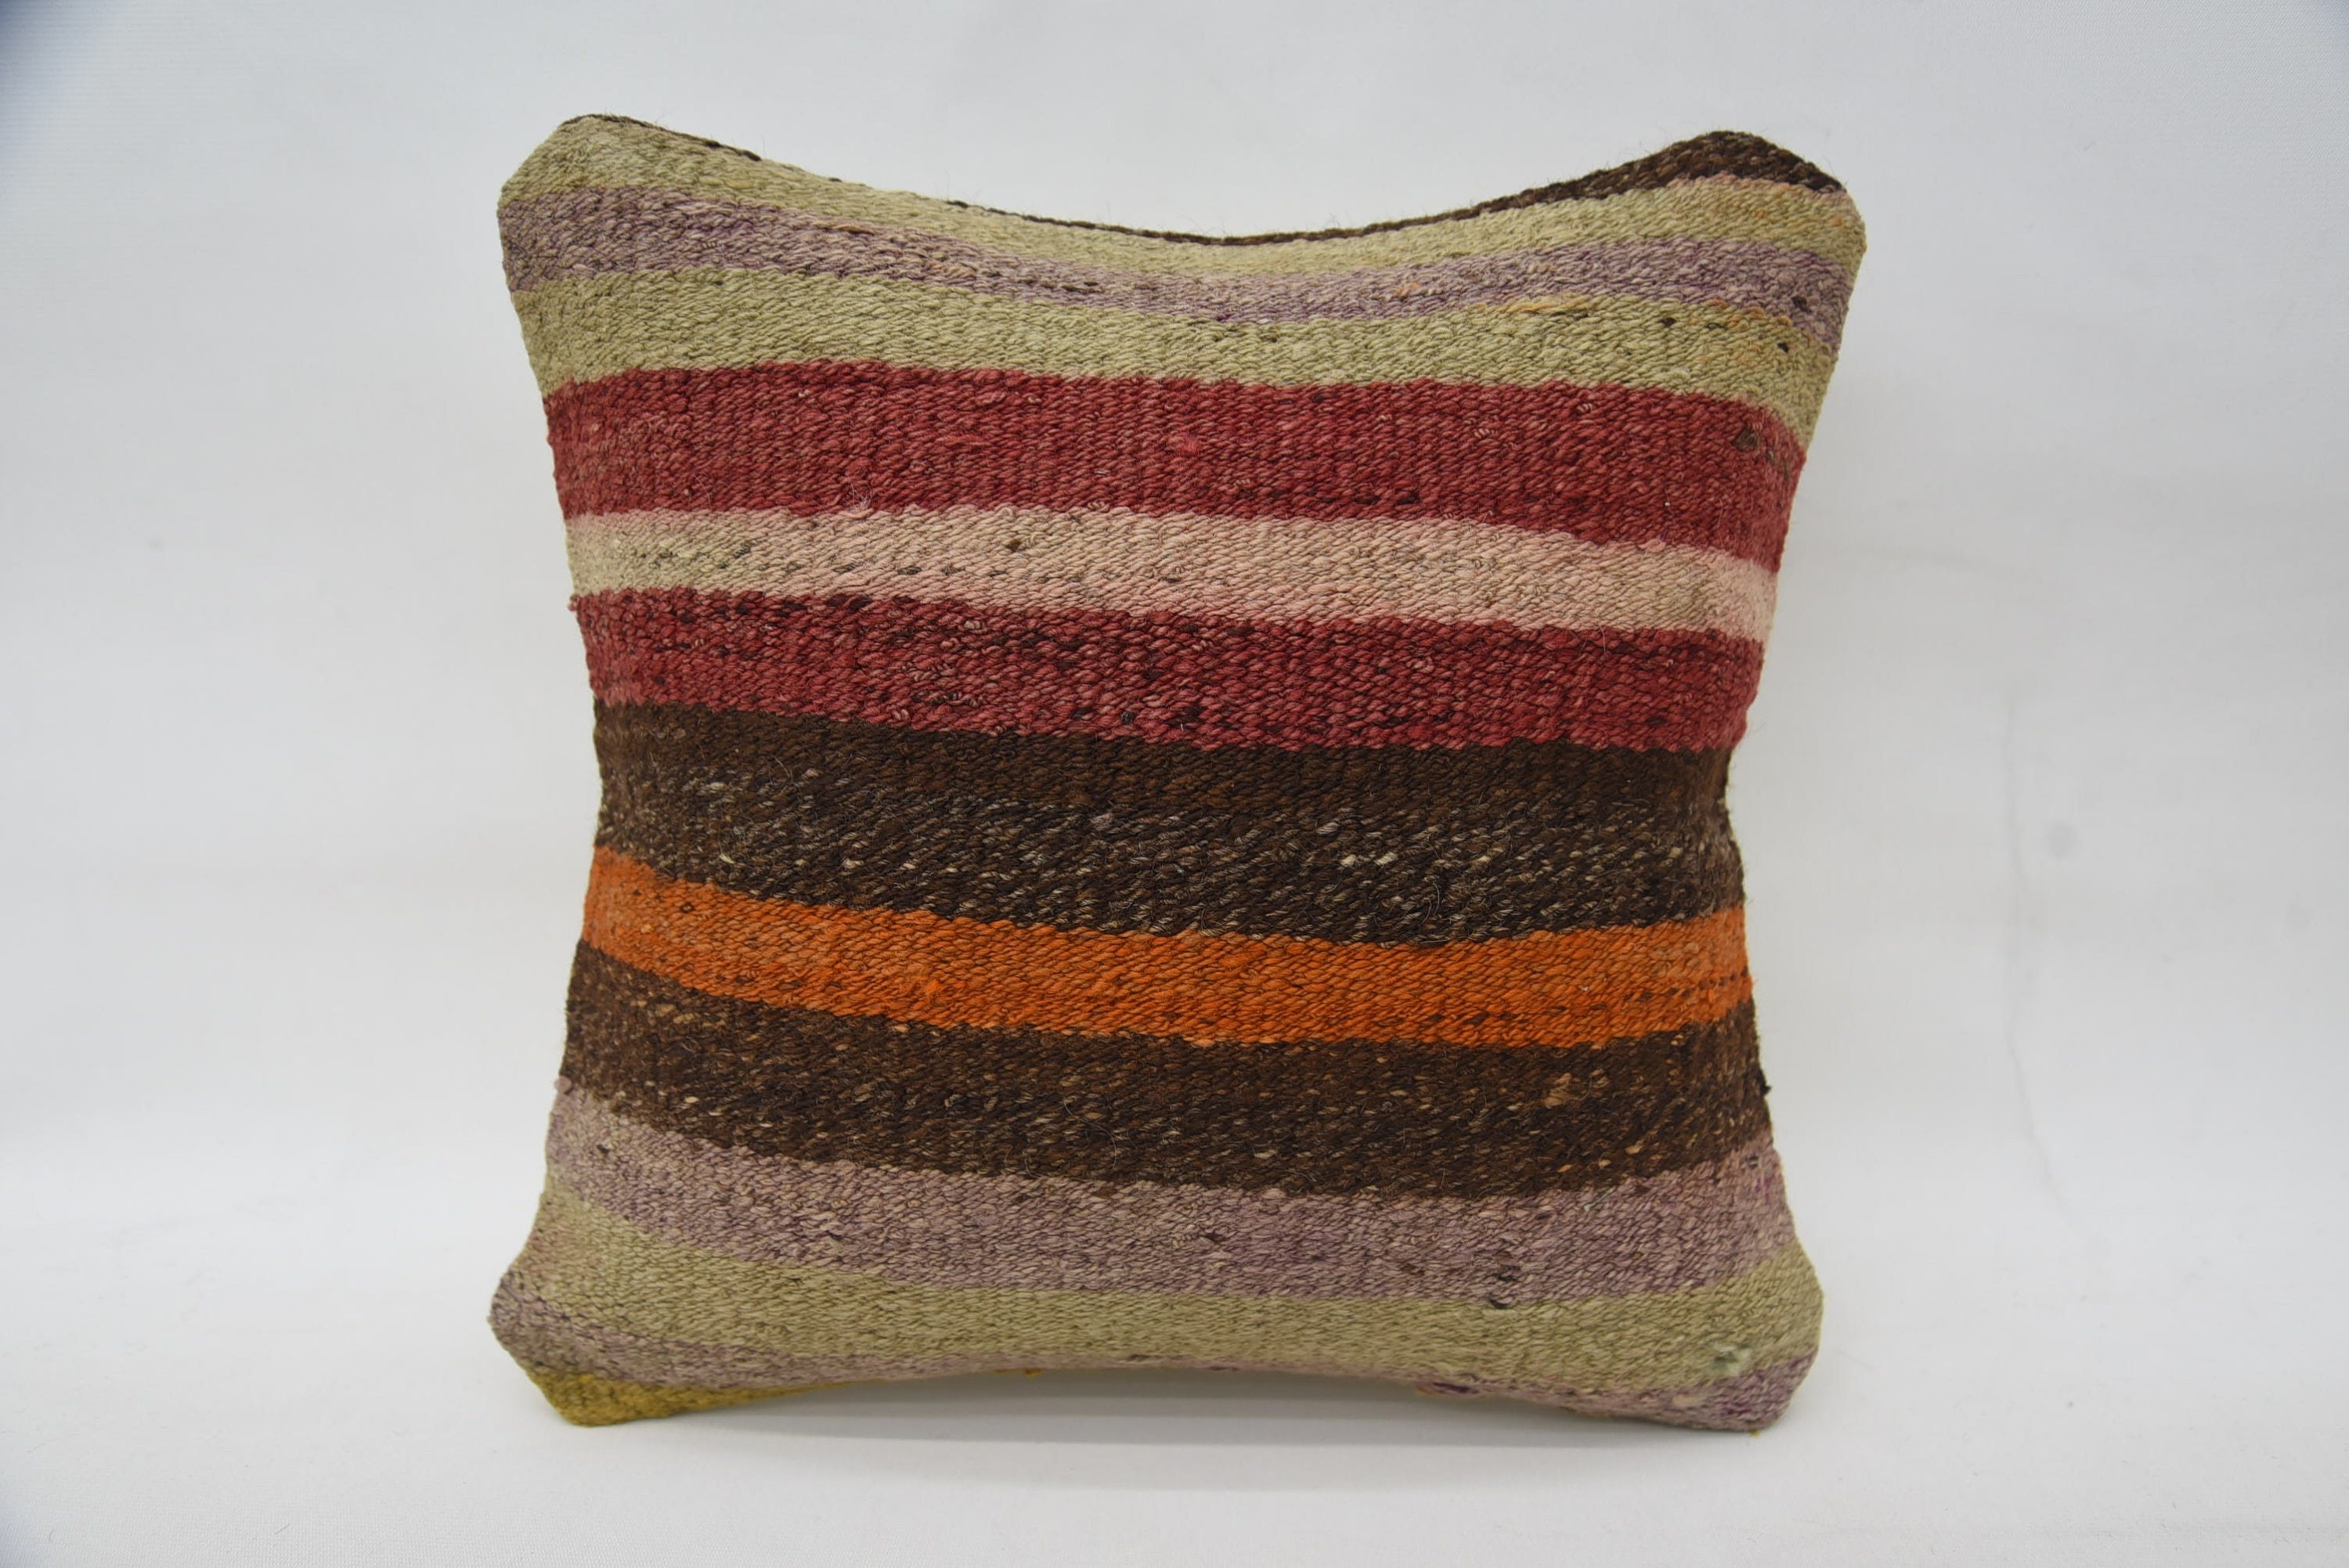 Pillow for Couch, 14"x14" Red Cushion Case, Wool Kilim Pillow Cushion Case, Handwoven Pillow, Turkish Pillow, Pillow for Sofa